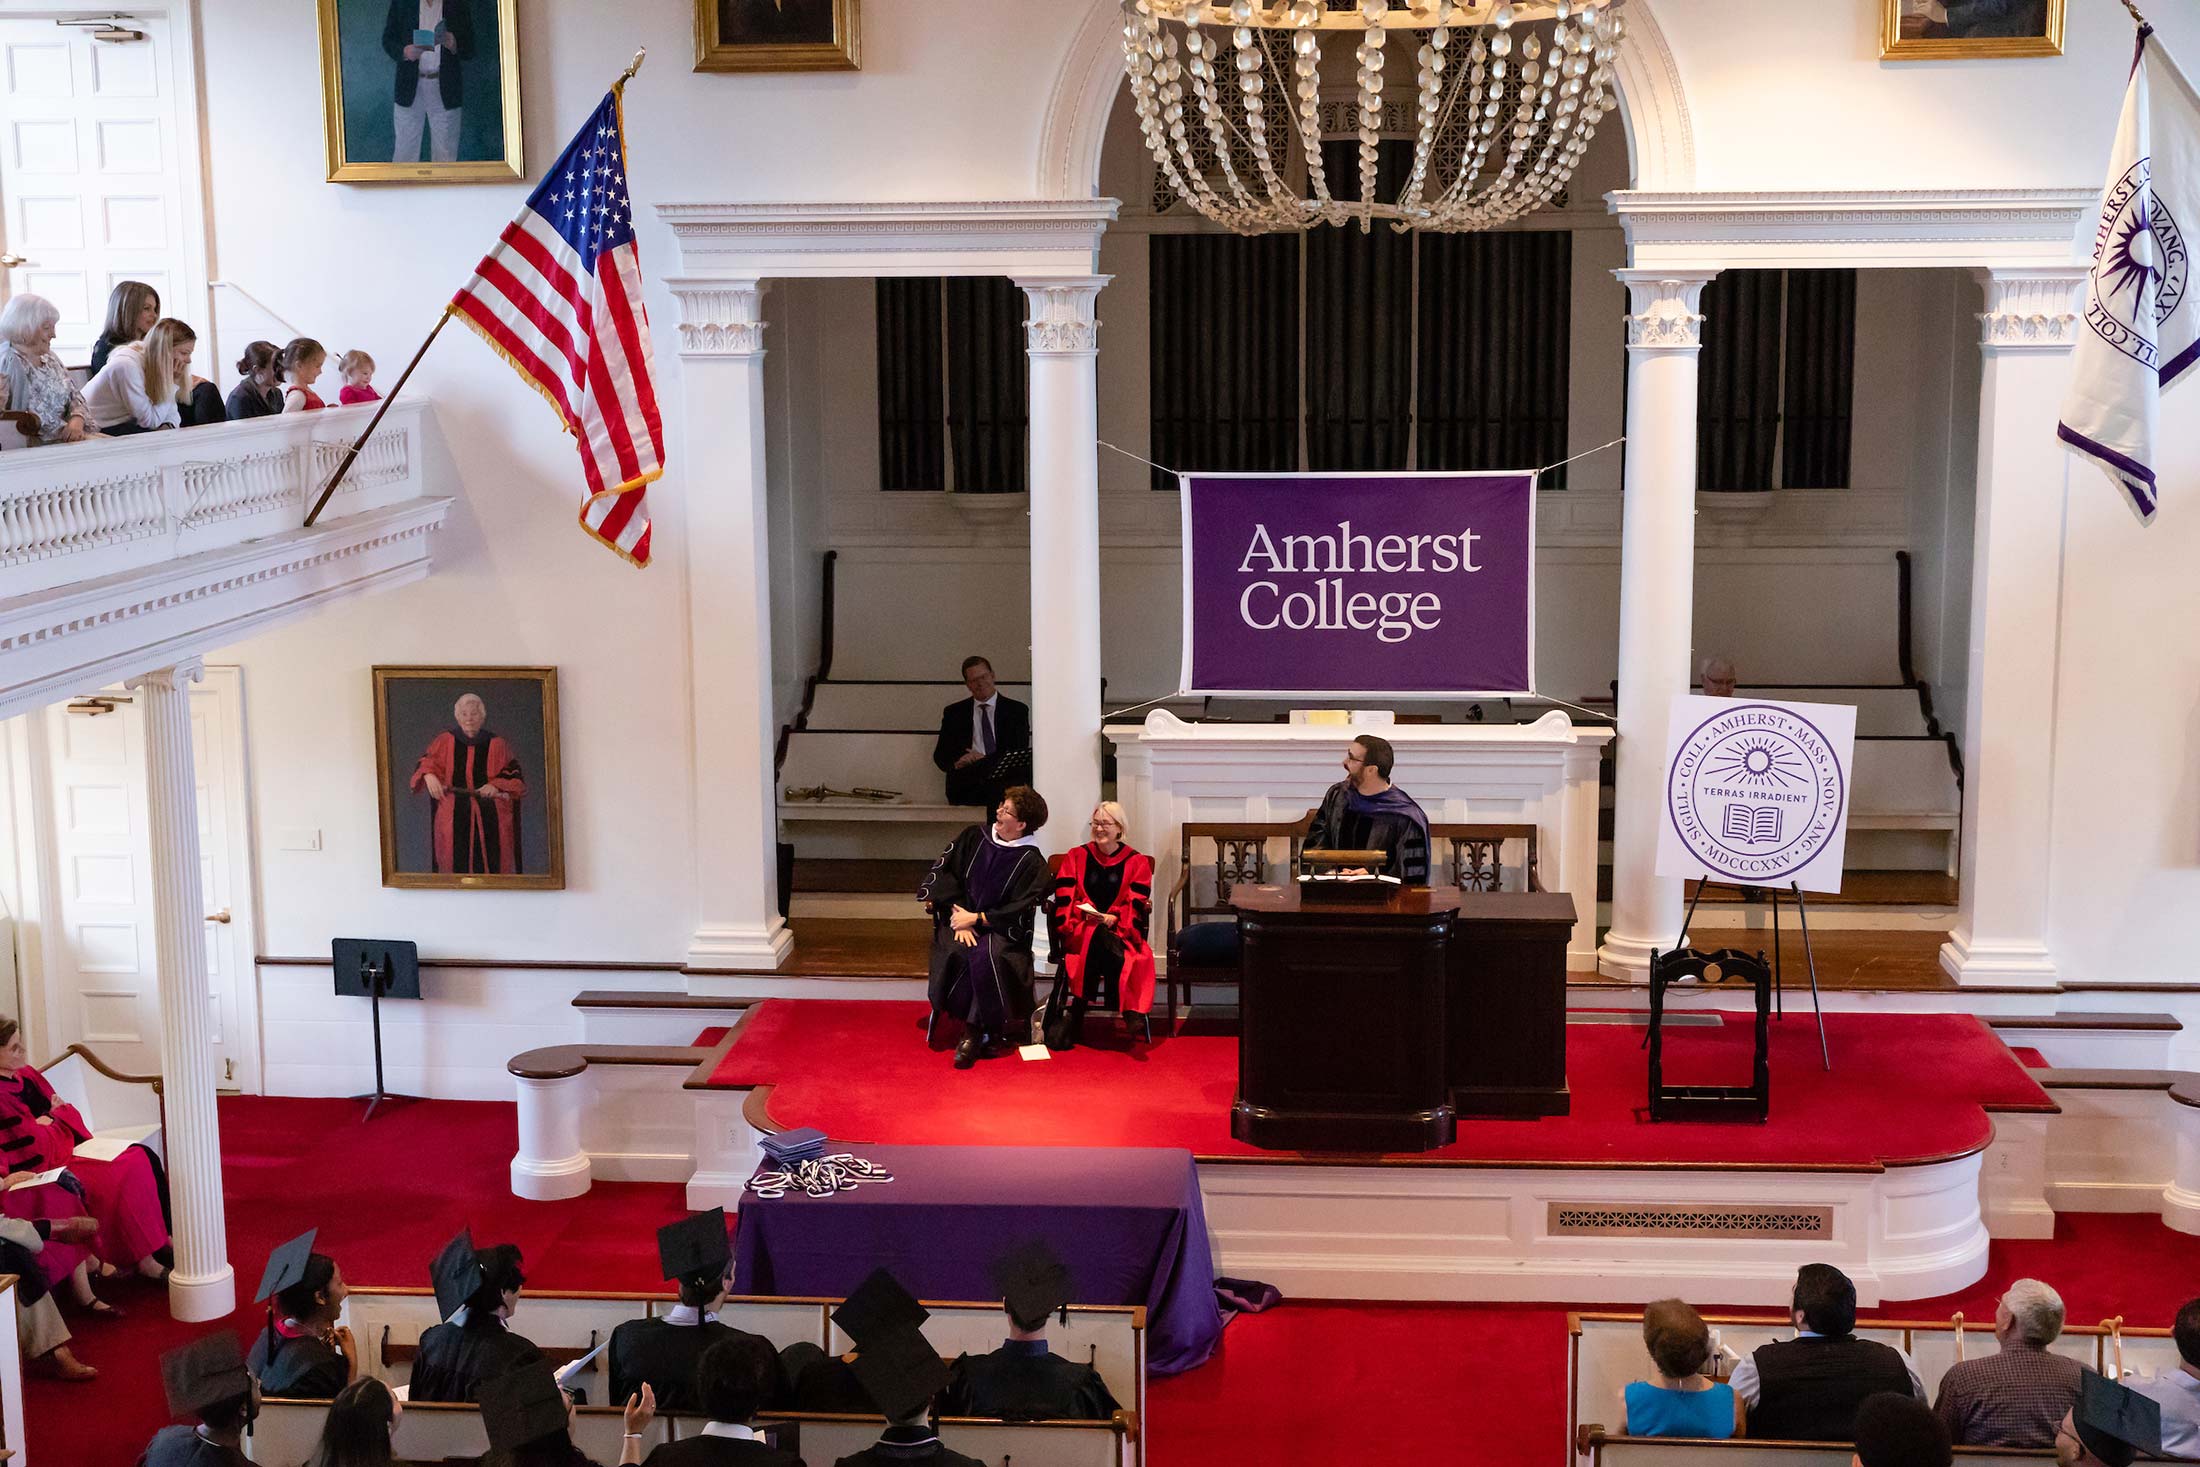 Senior Awards Assembly in Johnson Chapel at Amherst College